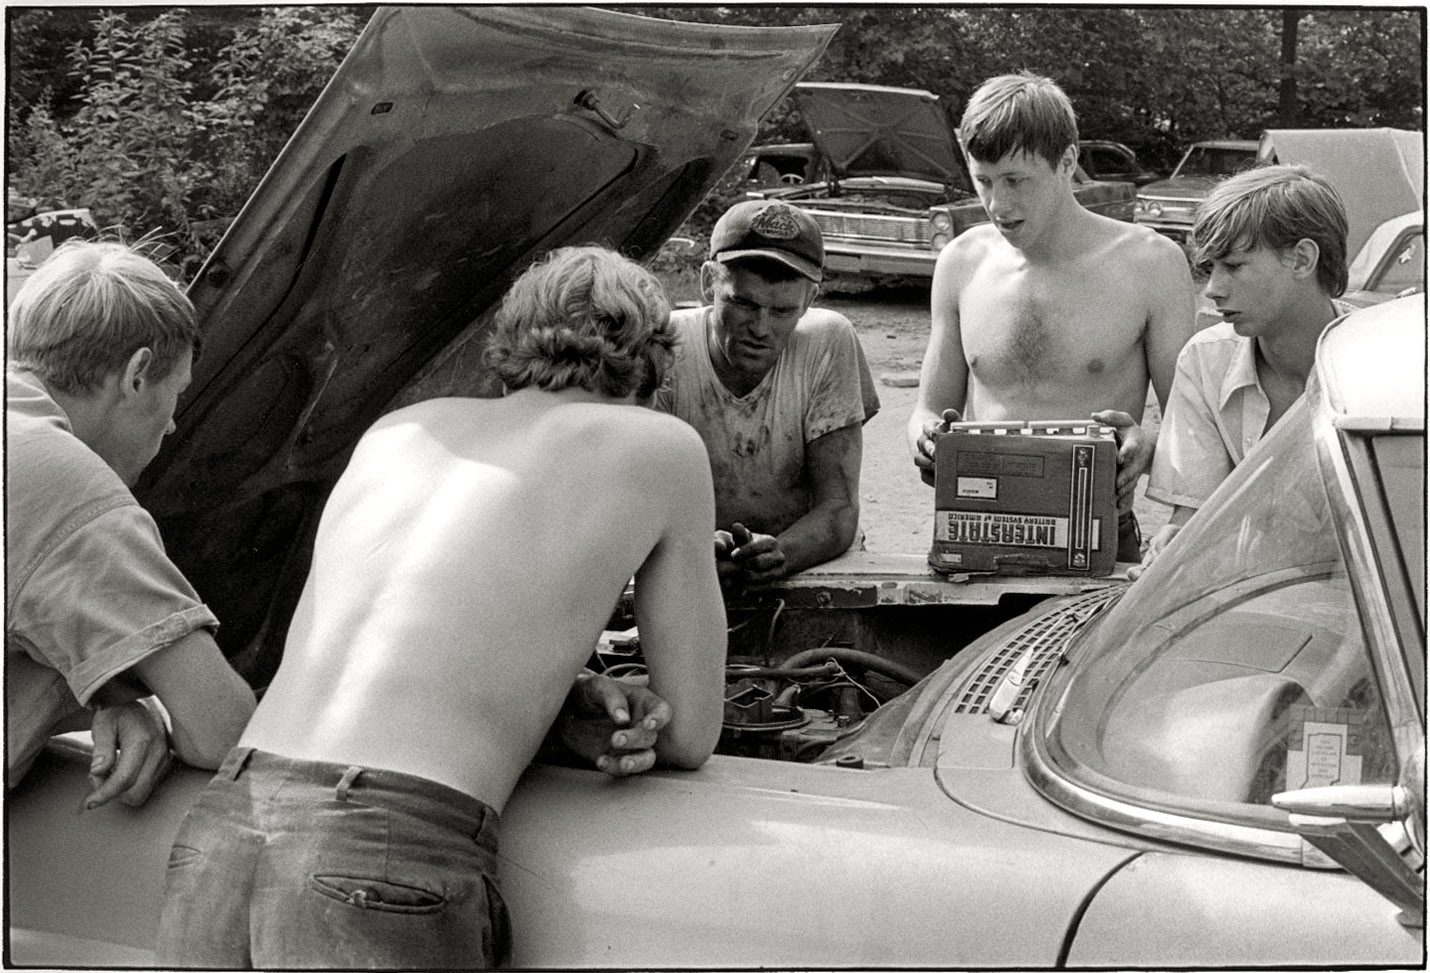 "Cornett family, Kentucky, 1972." Battery transplant for the 1957 Ford seen in the previous post from this series. Print from 35mm negative by William Gedney. Gedney Photographs and Writings Collection, Duke University.  View full size.